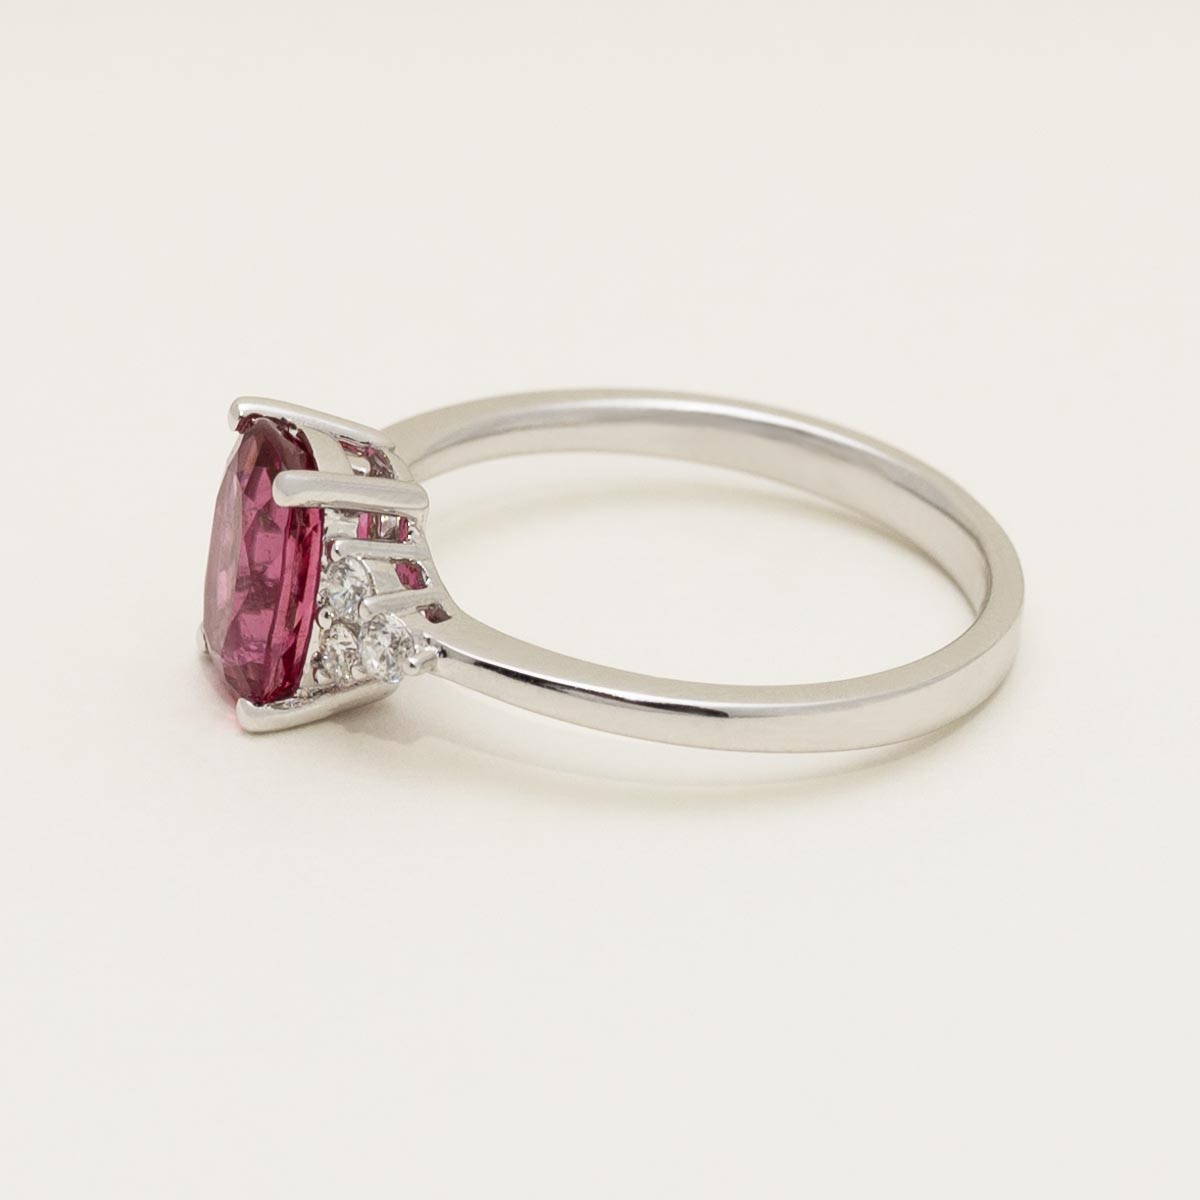 Cushion Cut Pink Tourmaline Ring in 18kt White Gold with Diamonds (1/7ct tw)